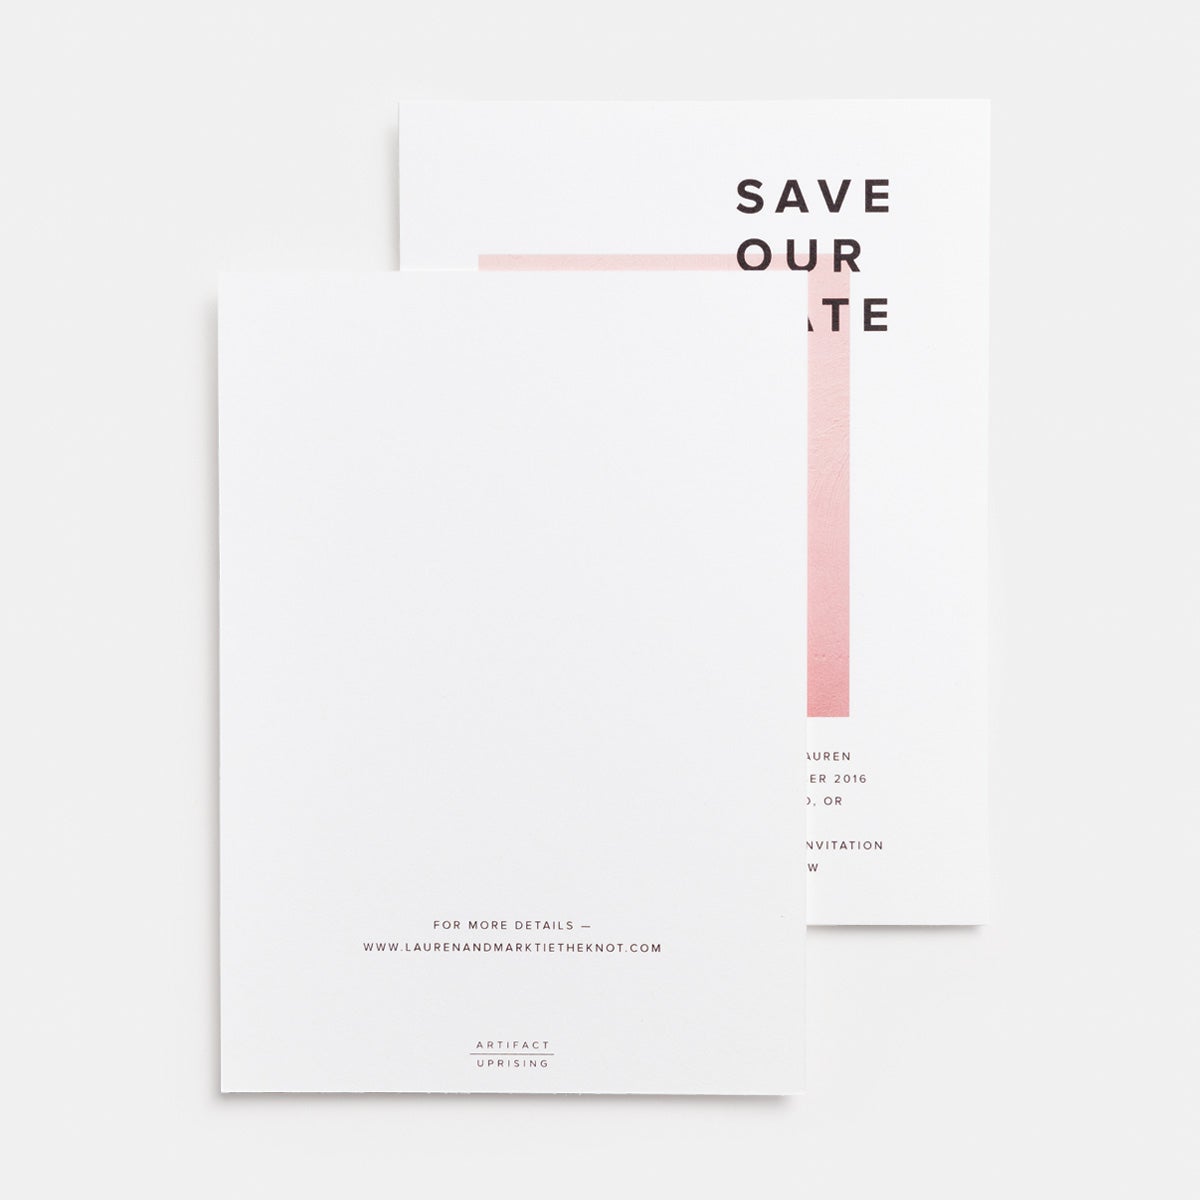 Save Our Date Card